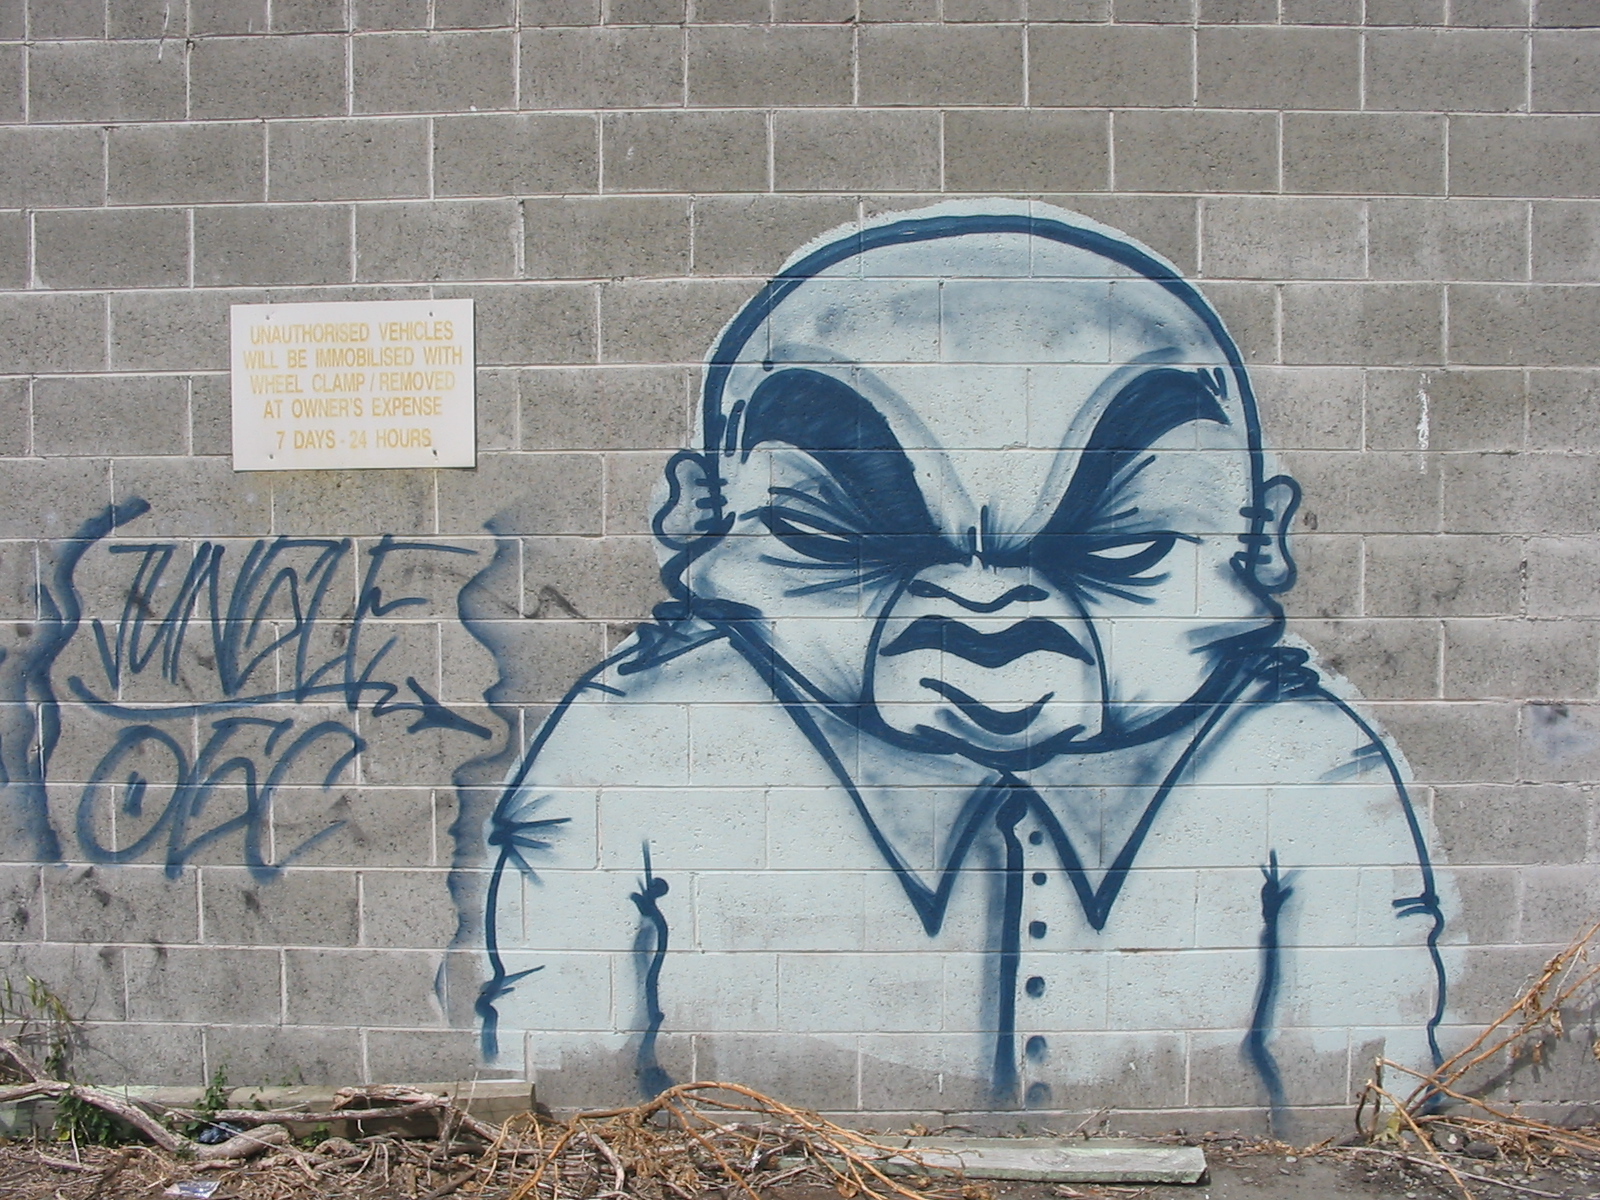 A Jungle character and tag from the mid-2000s, Christchurch. (Photo supplied by Dcypher)